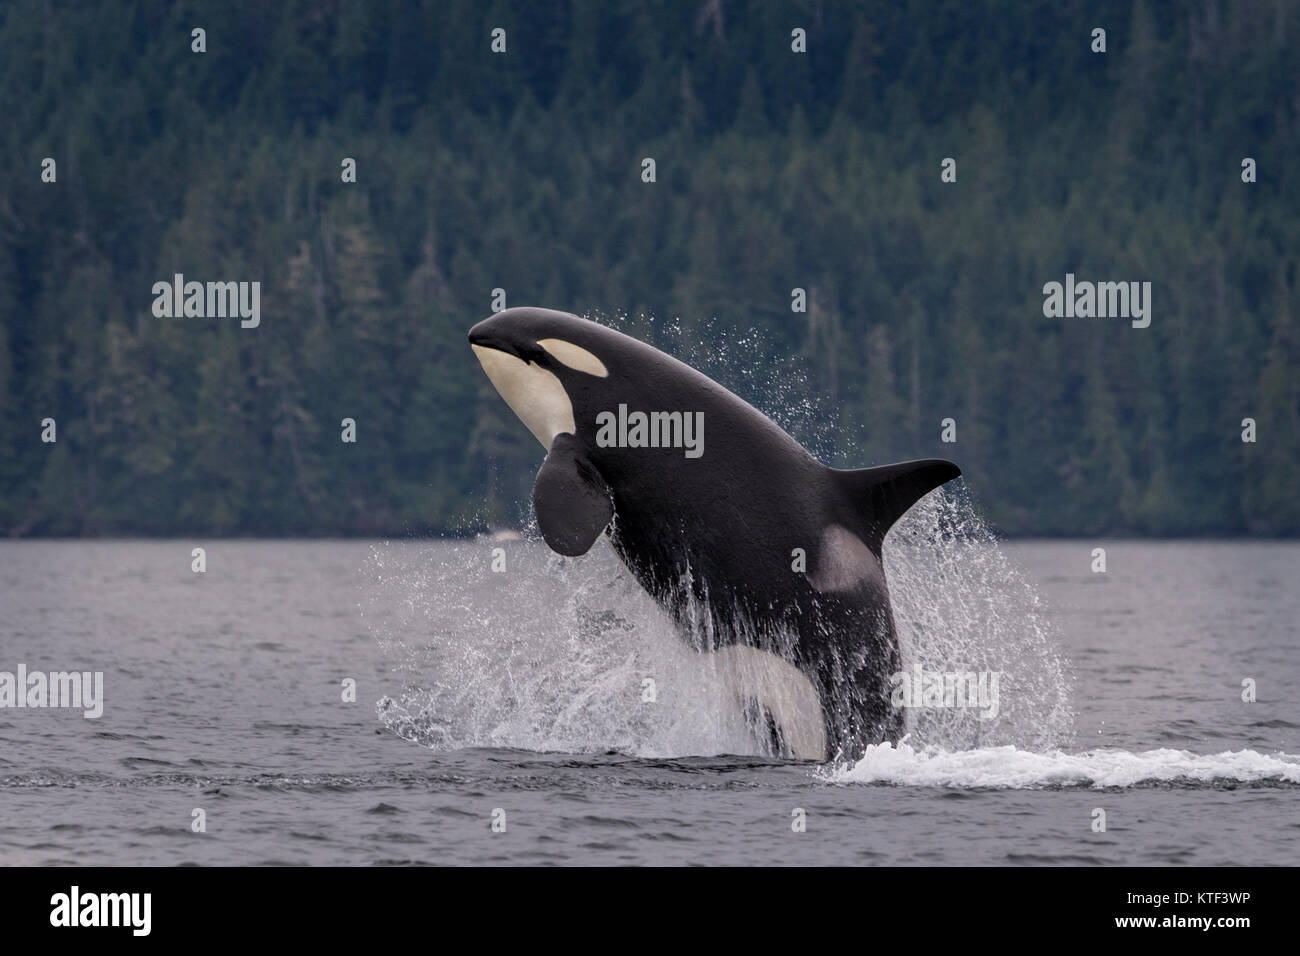 Northern resident orca whale (killer whale, Orcinus orca) breaching off northern Vancouver Island, First Nations Territory, British Columbia, Canada. Stock Photo